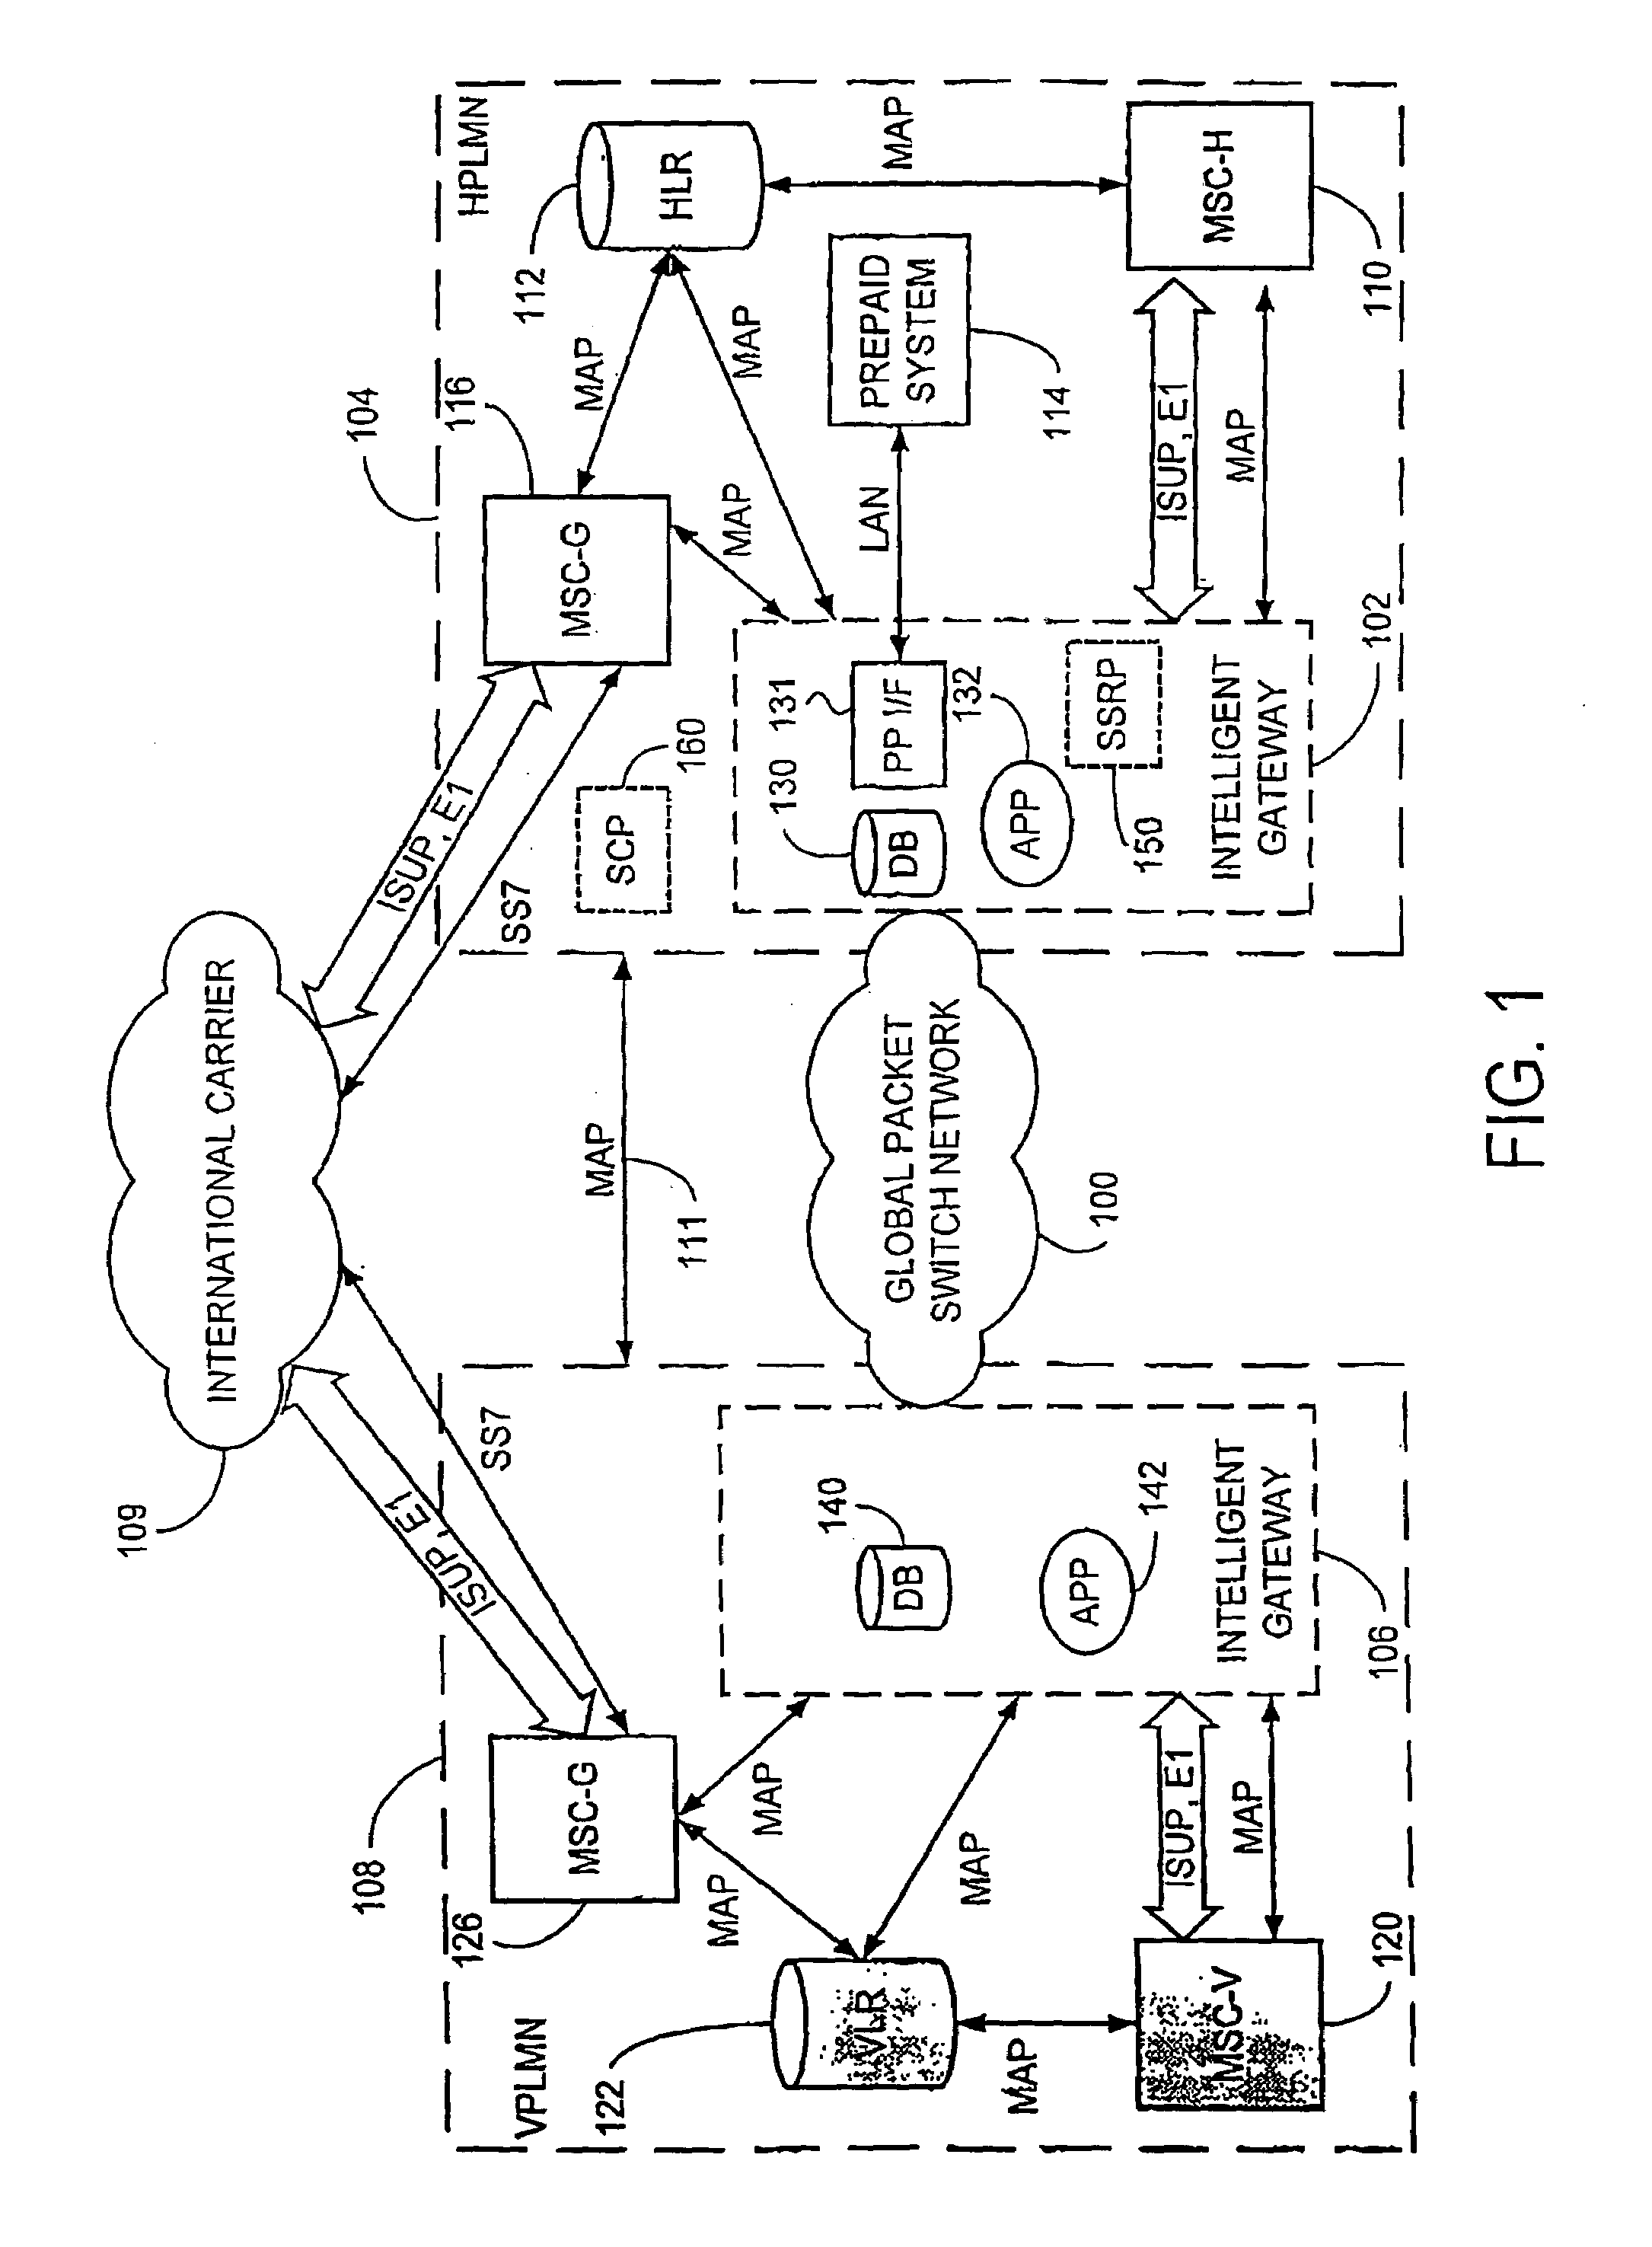 System and method for roaming for prepaid mobile telephone service